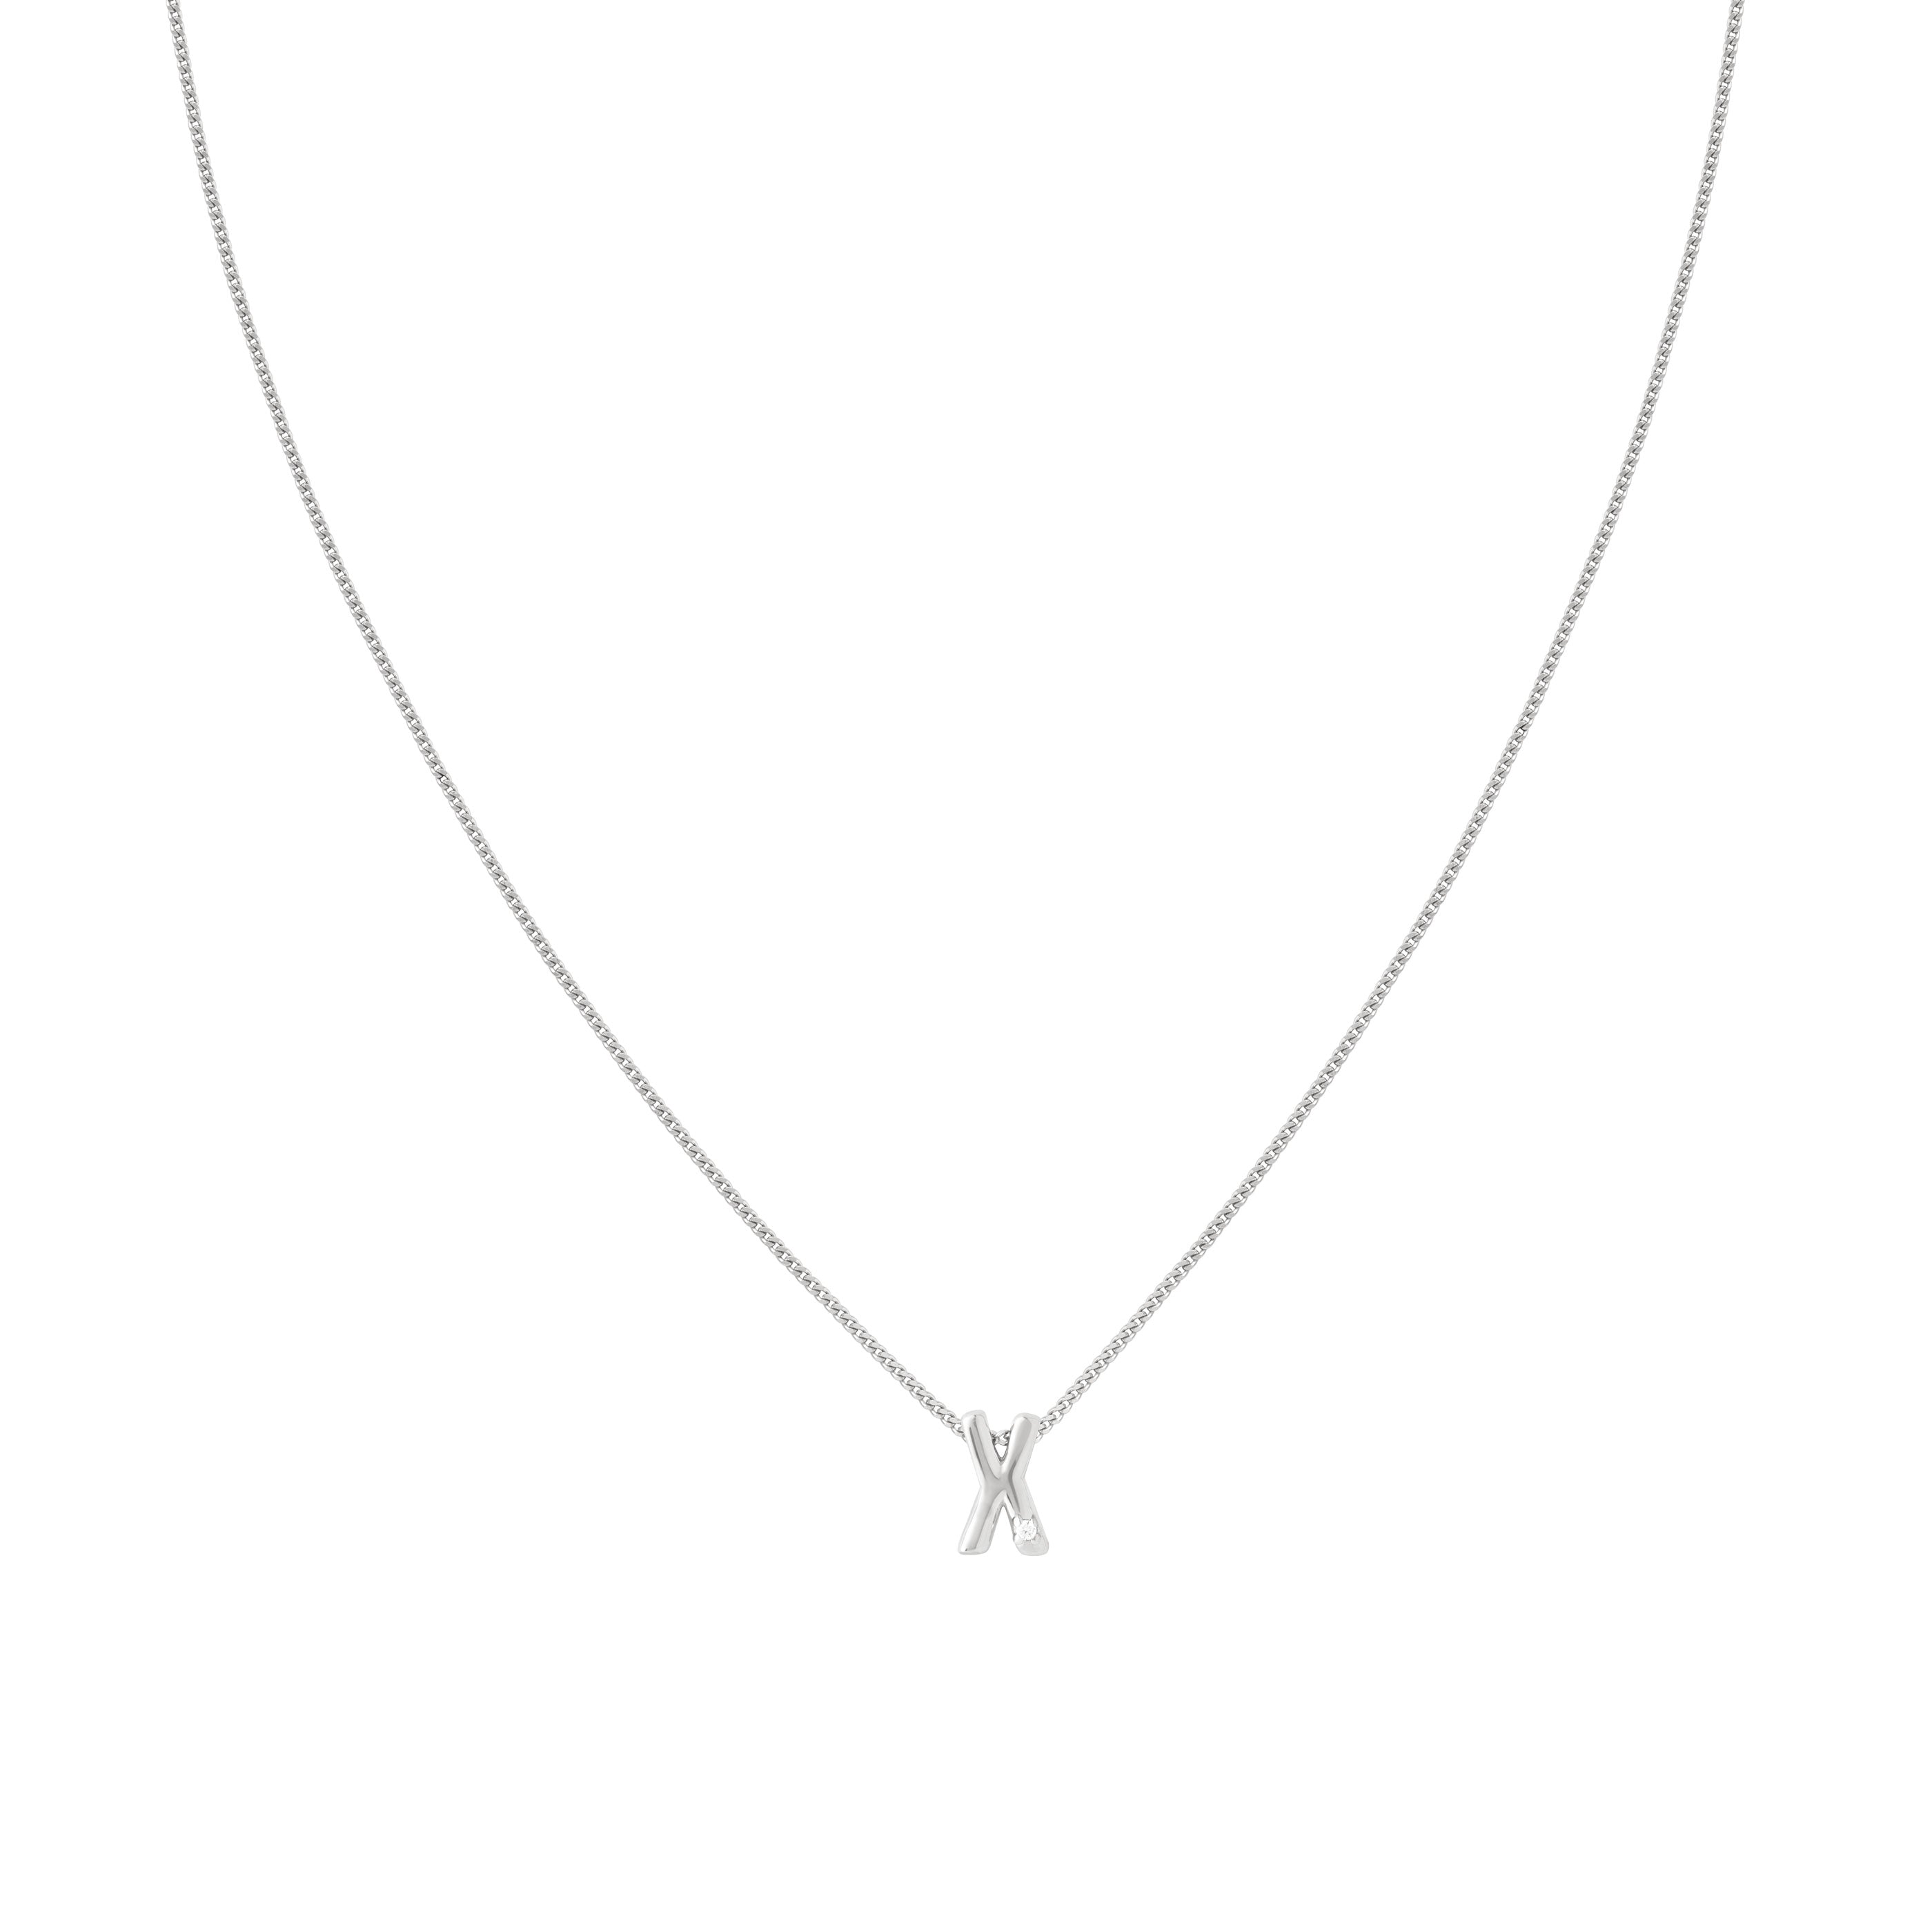 X Initial Pendant Necklace in Silver